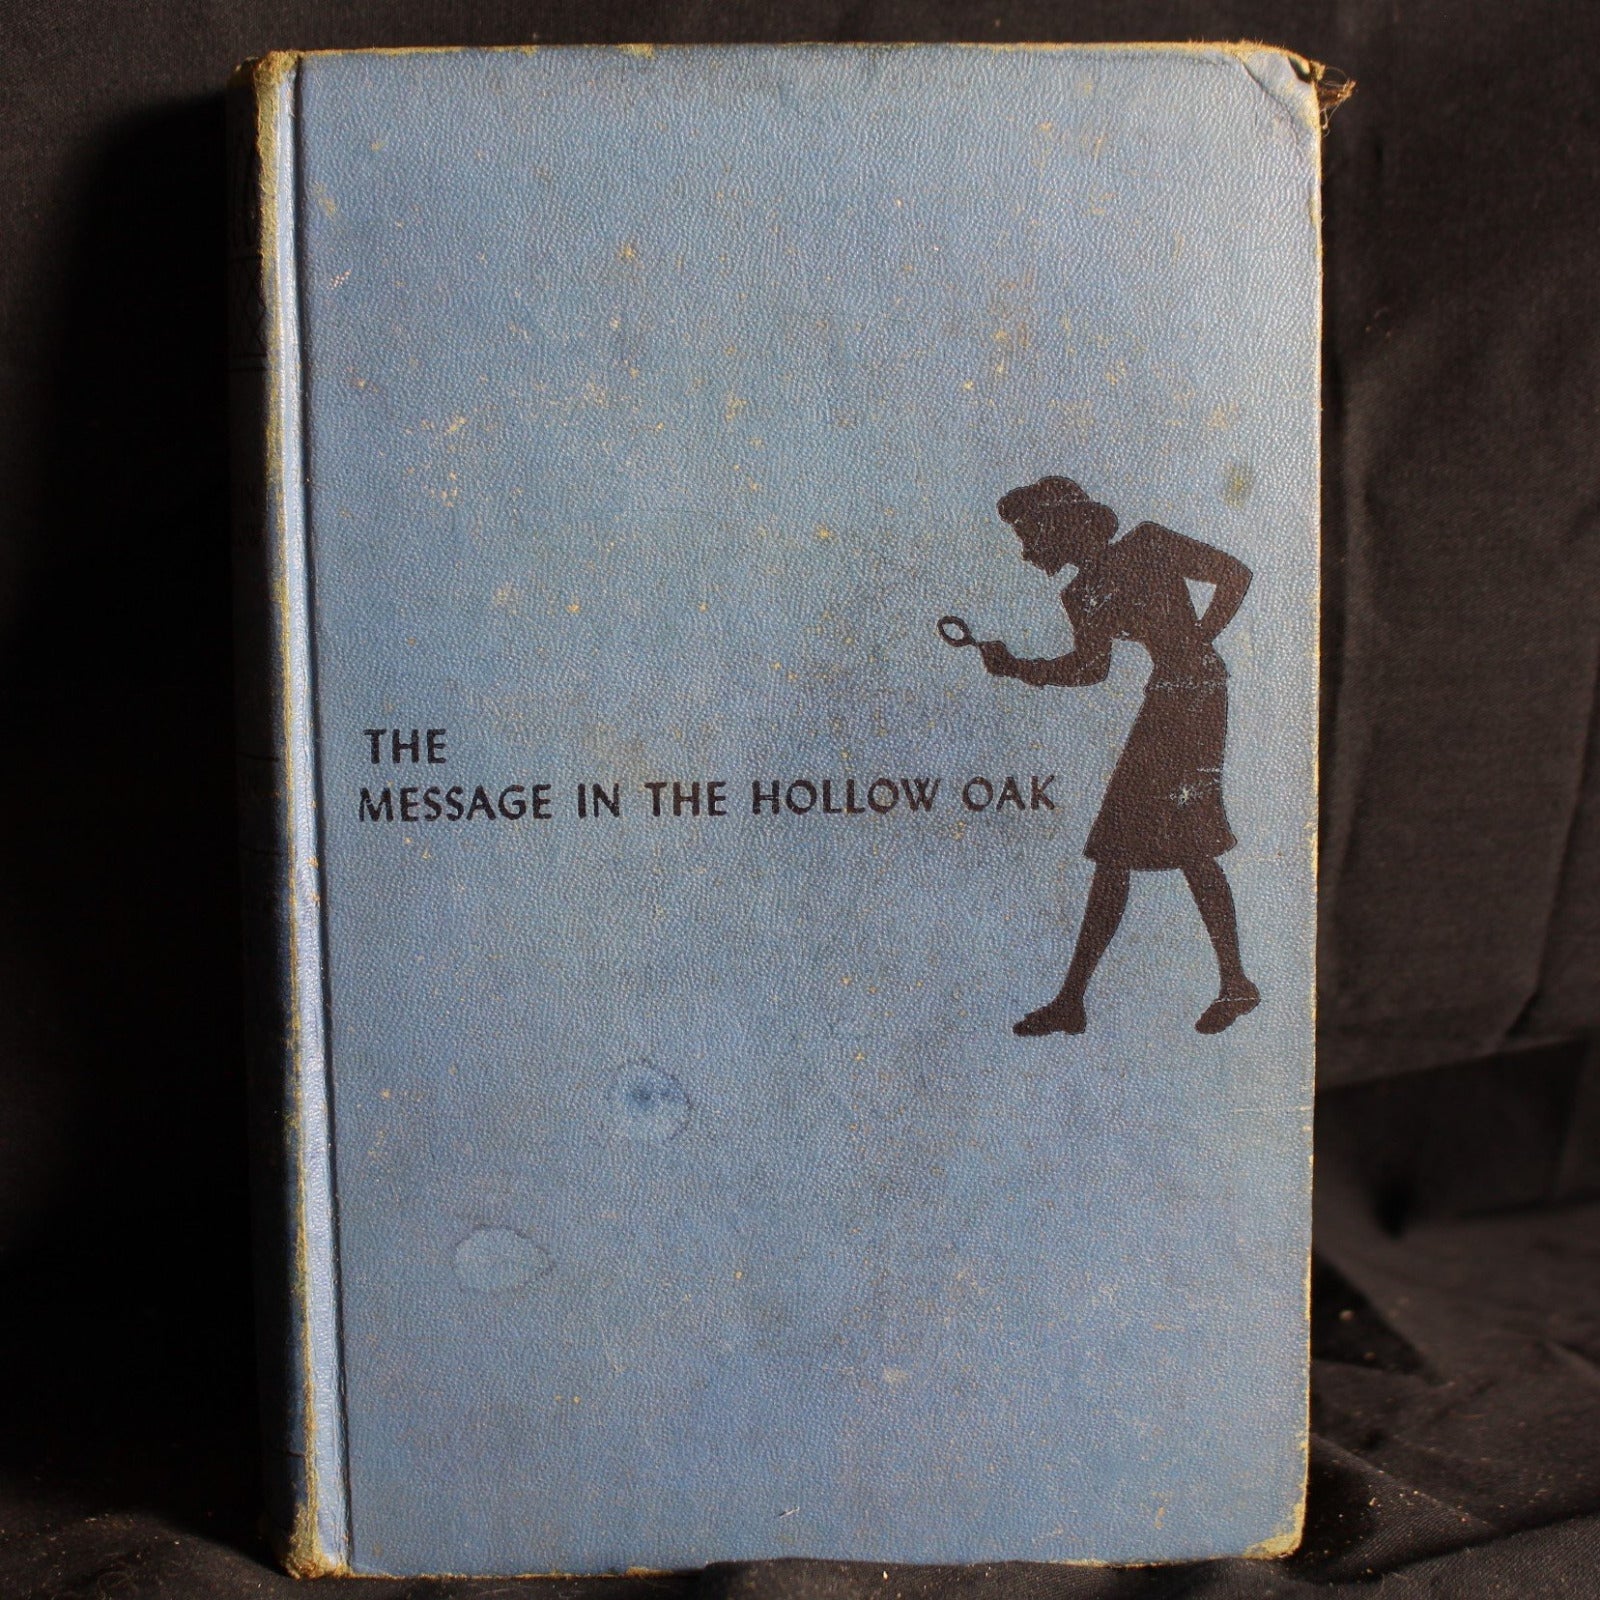 Vintage Hardcover First Edition Nancy Drew The Message in the Hollow Oak By Carolyn Keene, 1935